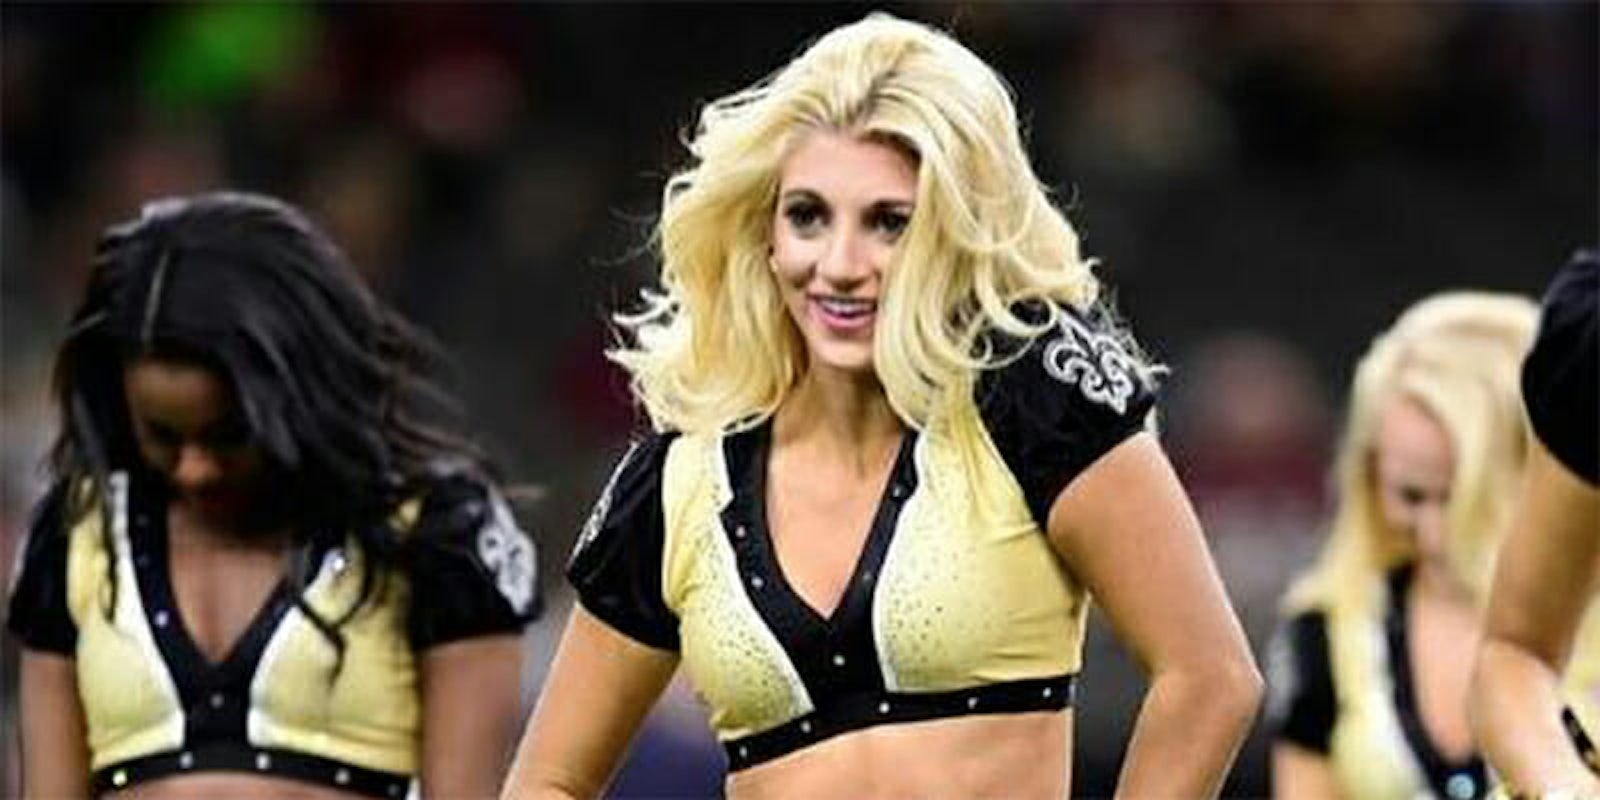 Bailey Davis, a former cheerleader for the Saints, has filed a complaint against the team for gender discrimination.